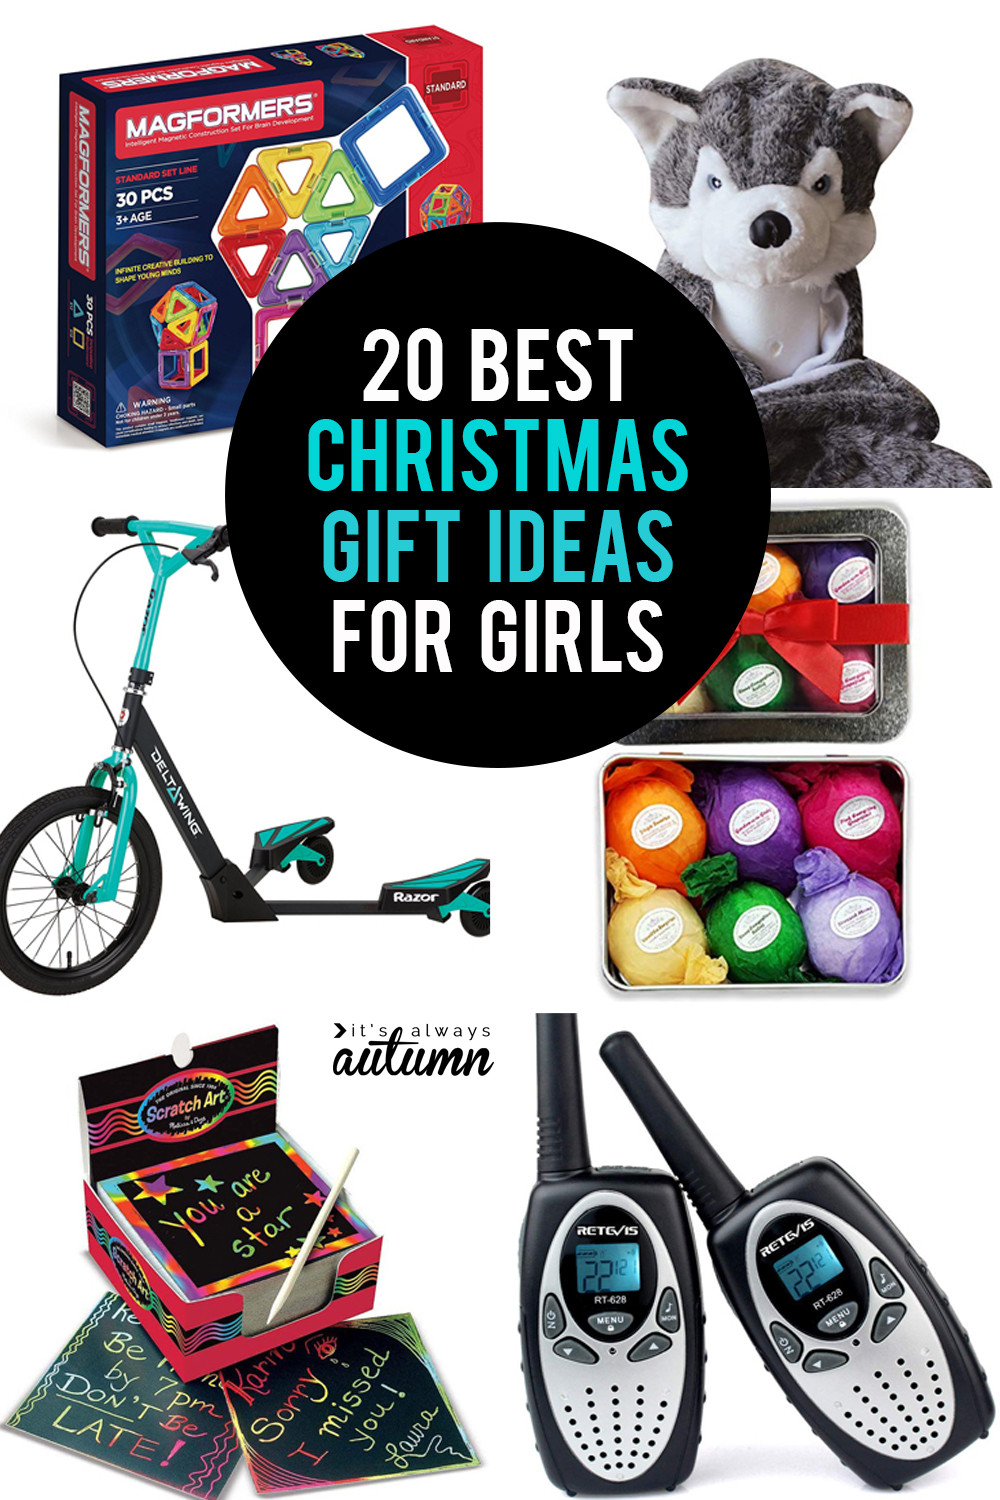 Great Gift Ideas For Girls
 The 20 best Christmas ts for girls It s Always Autumn